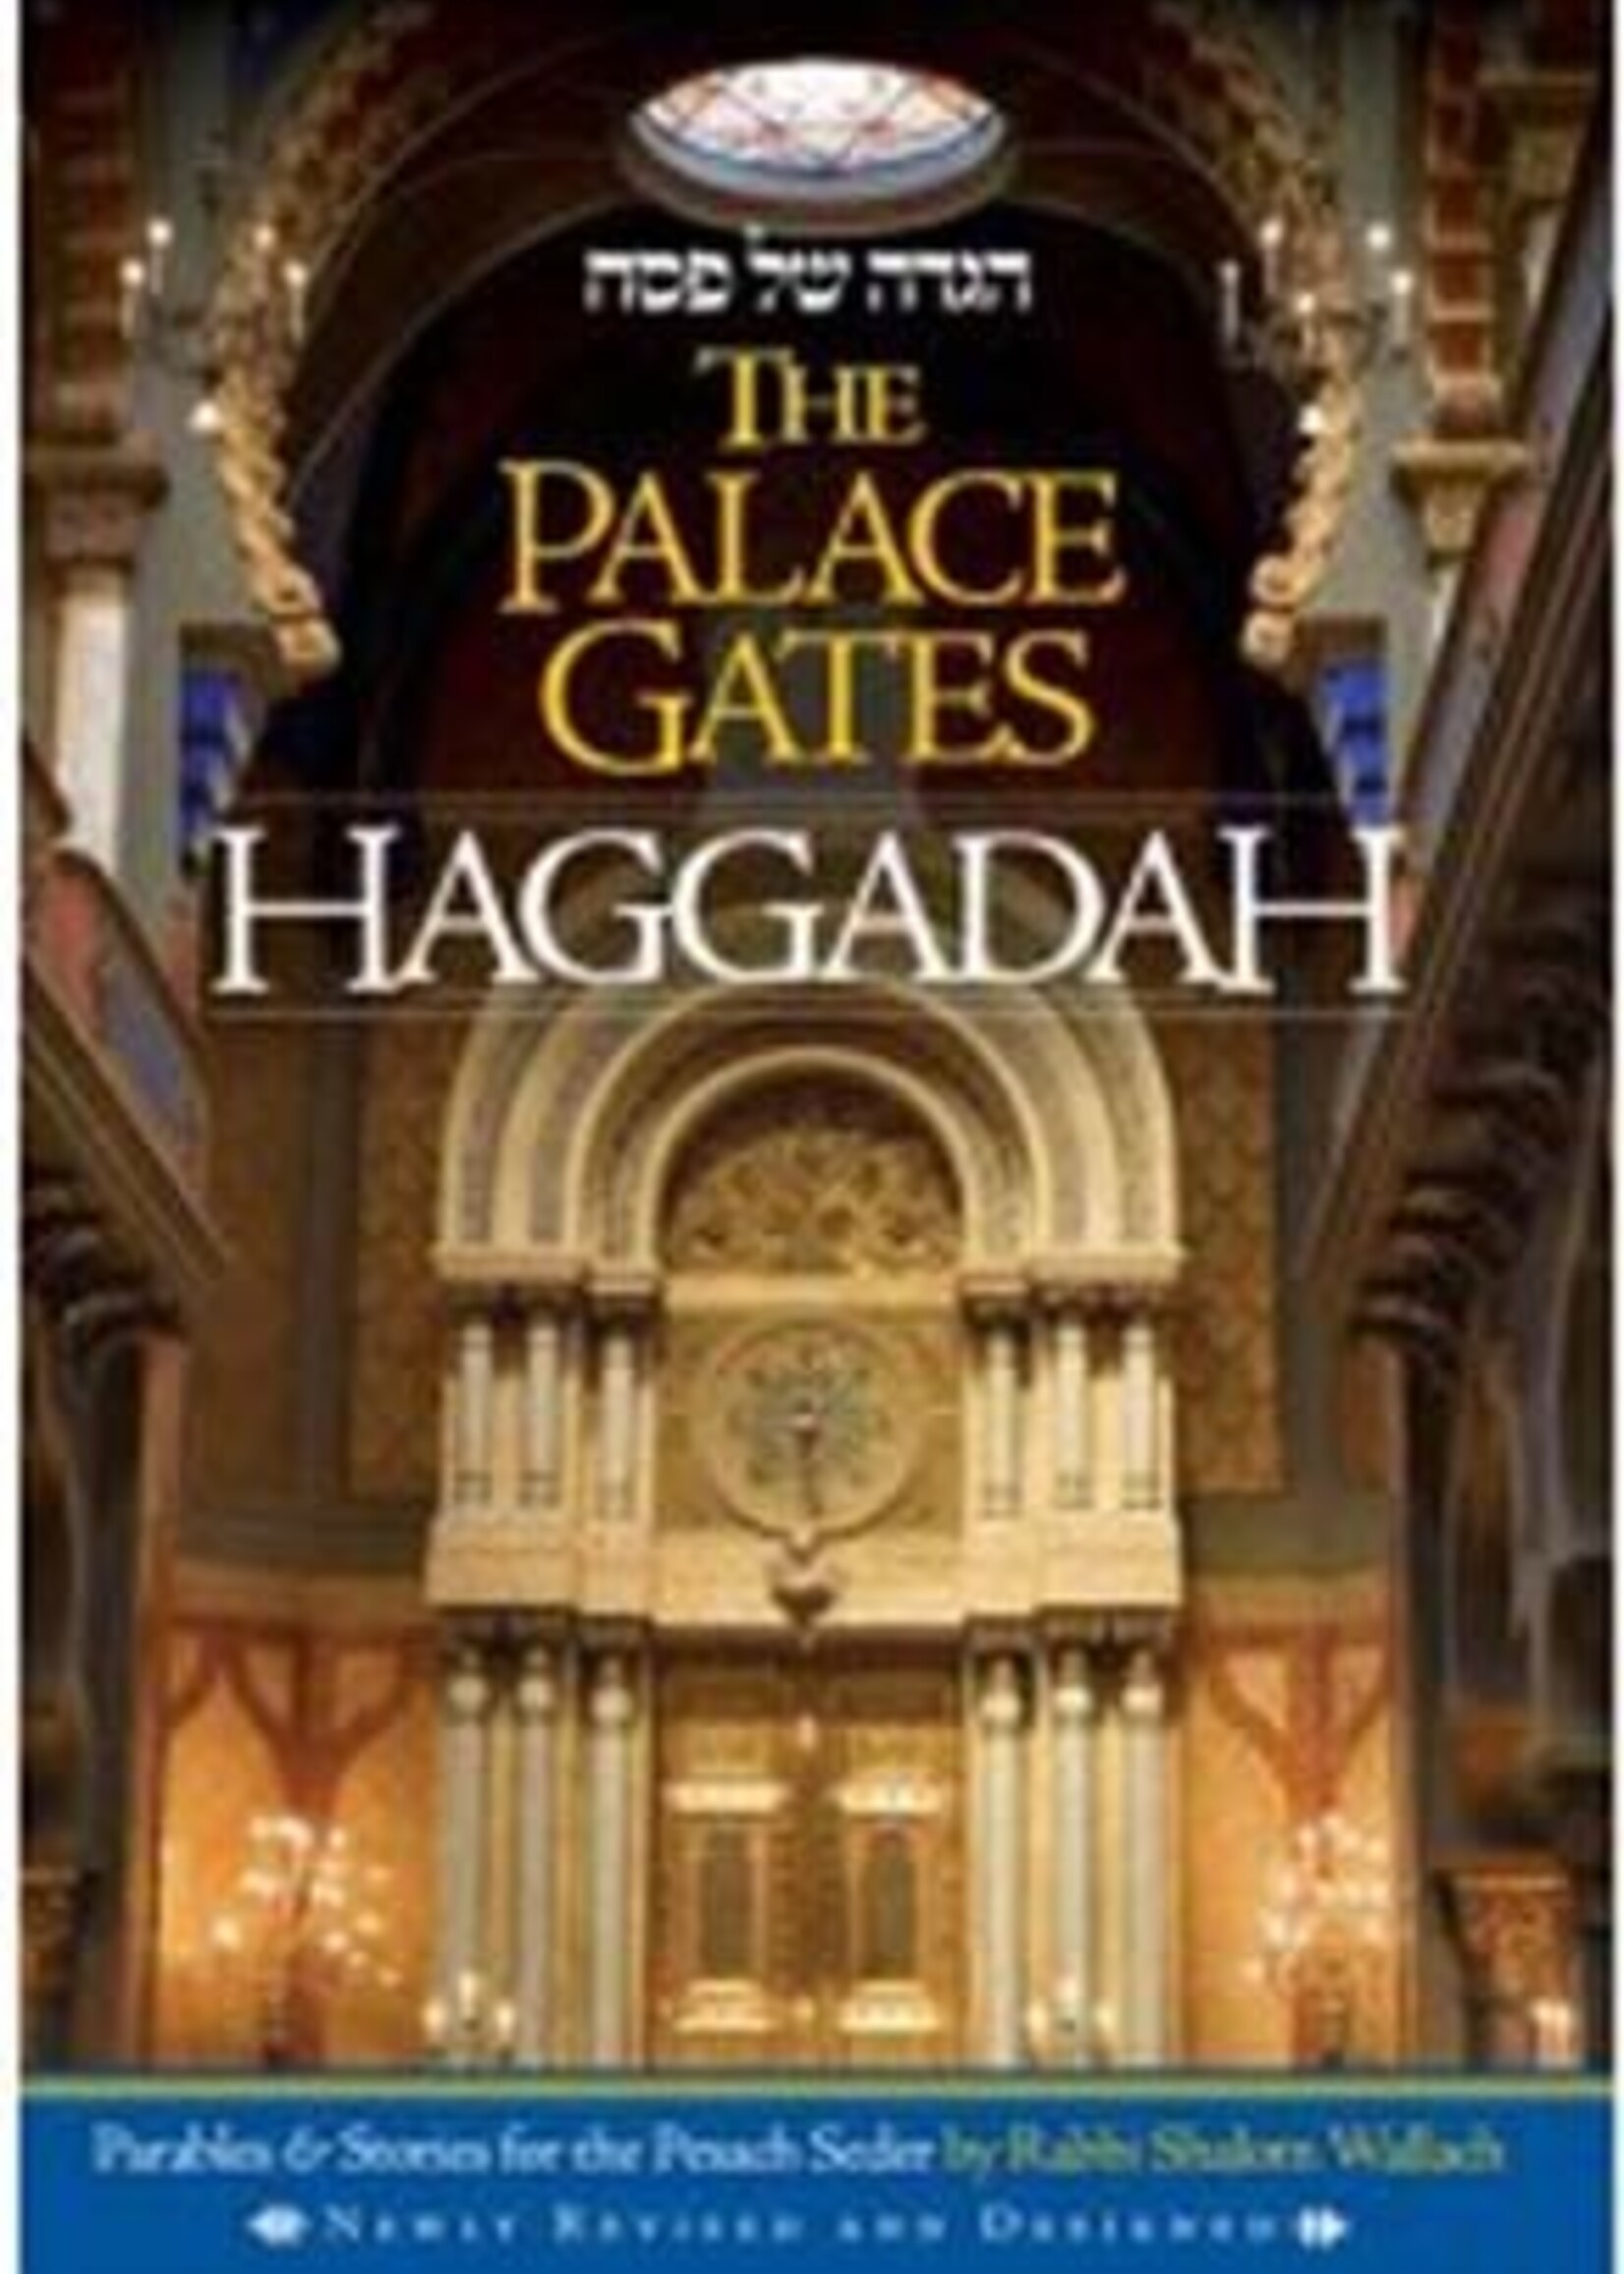 Rabbi Shalom Wallach The Palace Gates Haggadah - Parables and Stories for the Pesach Seder